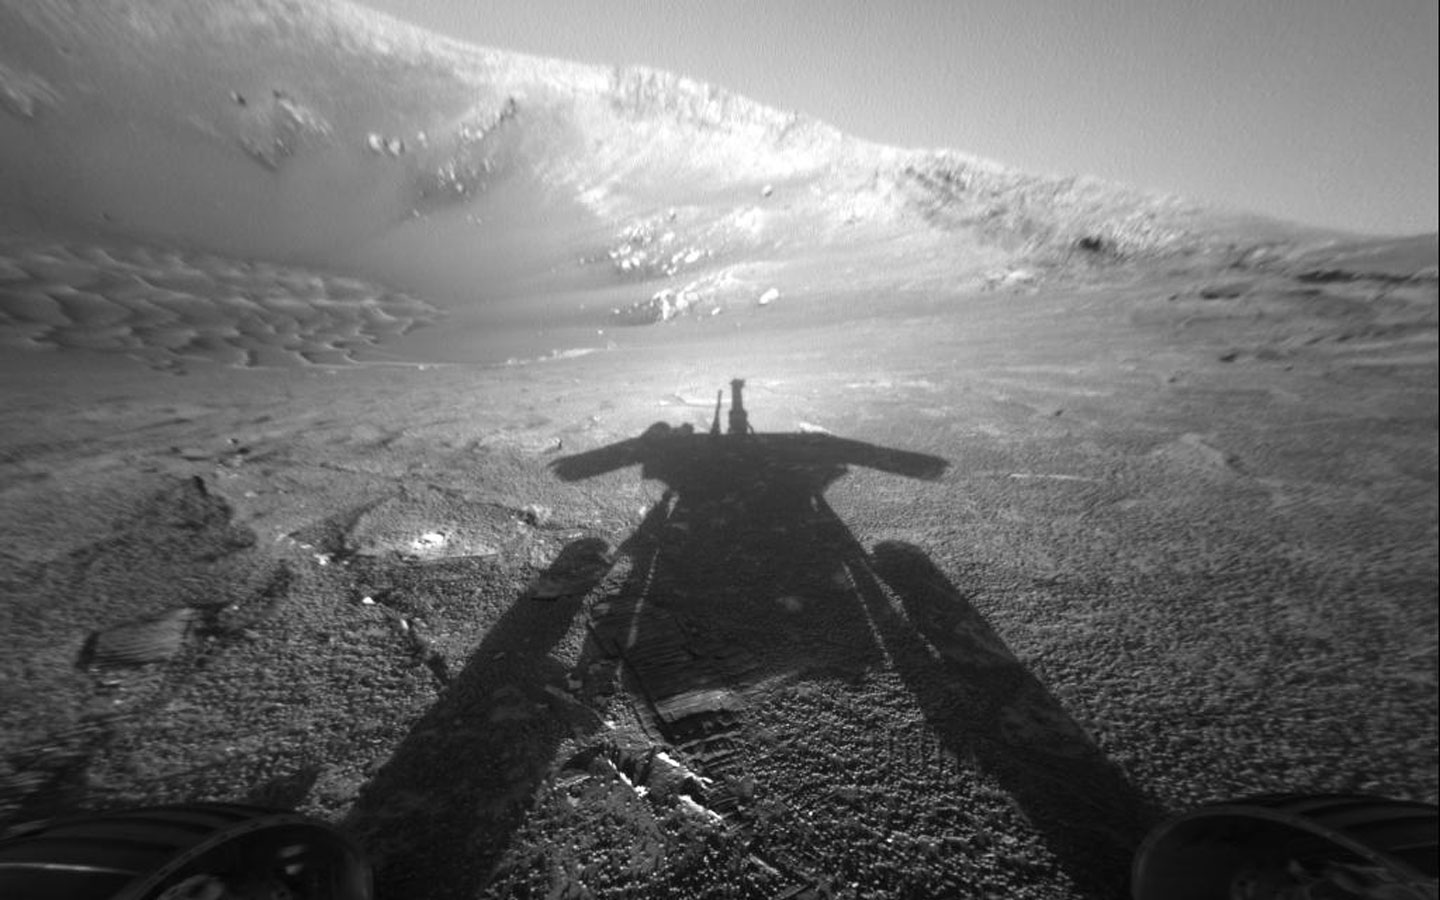 opportunity-rover